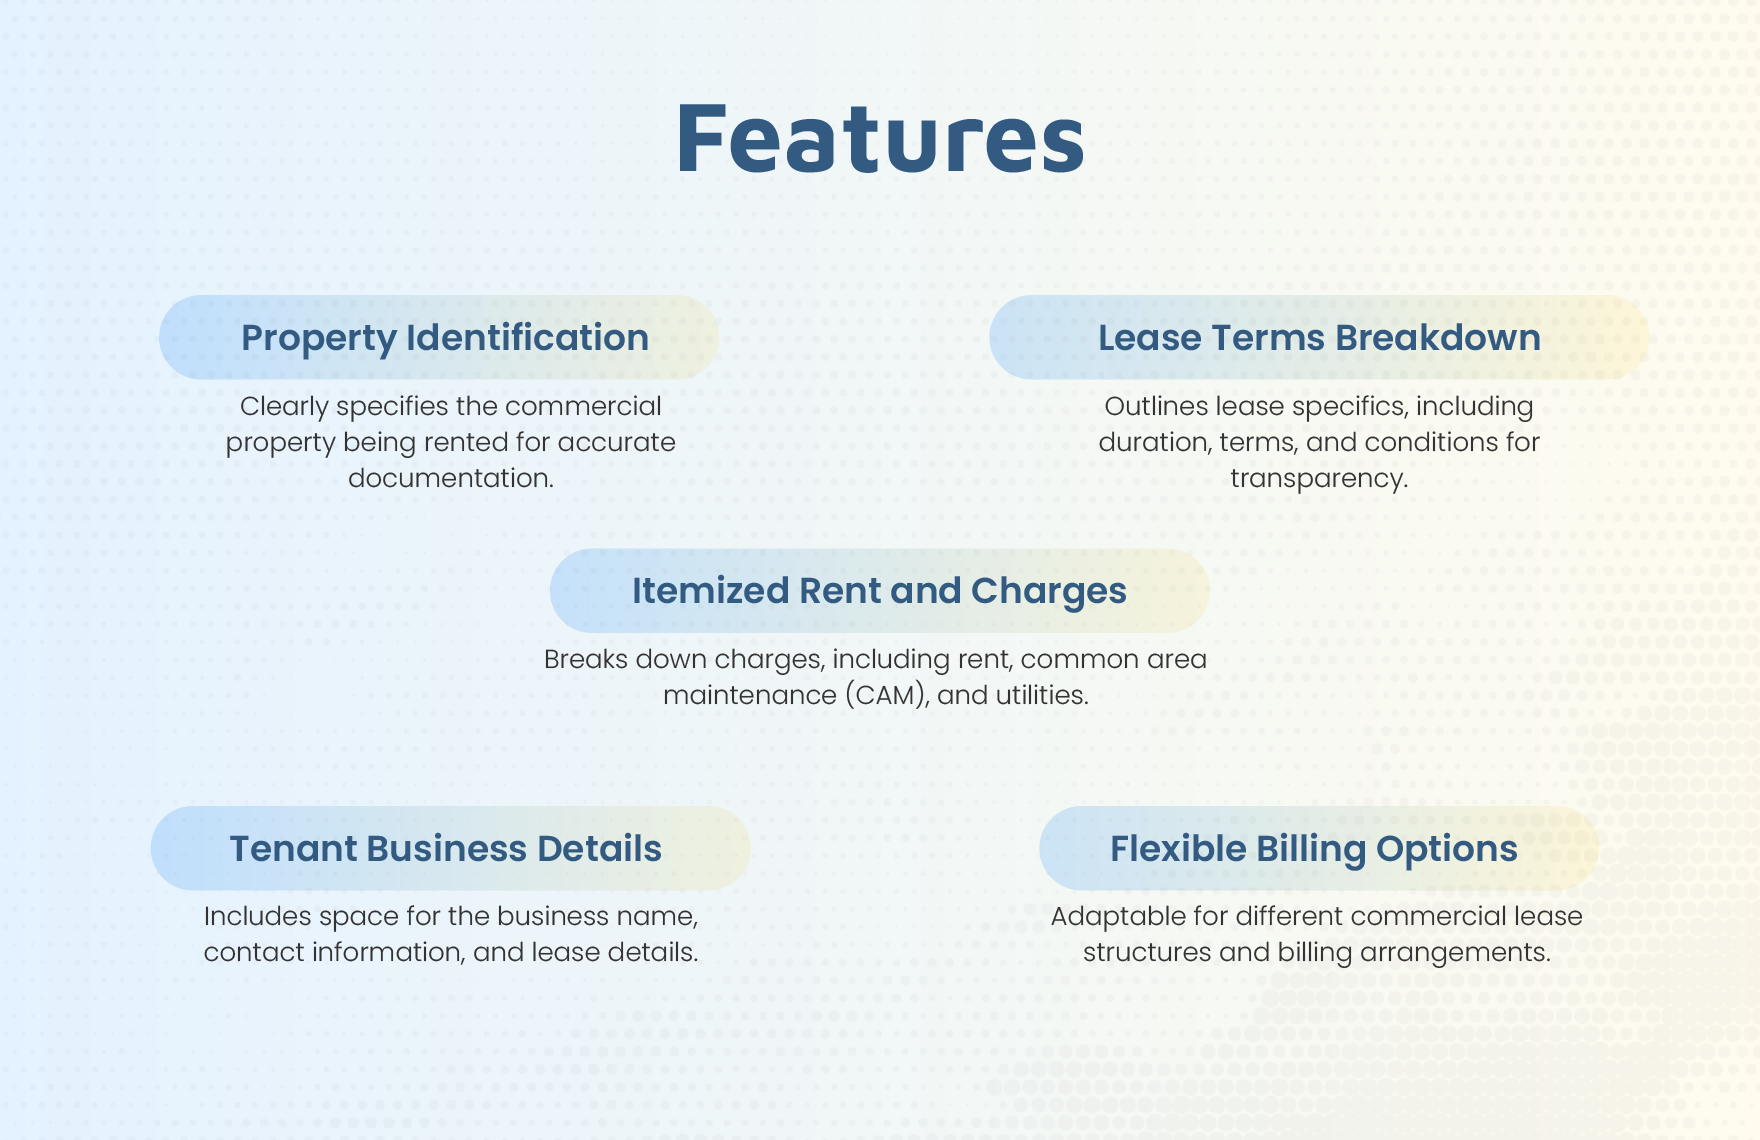 Commercial Rent Invoice Template